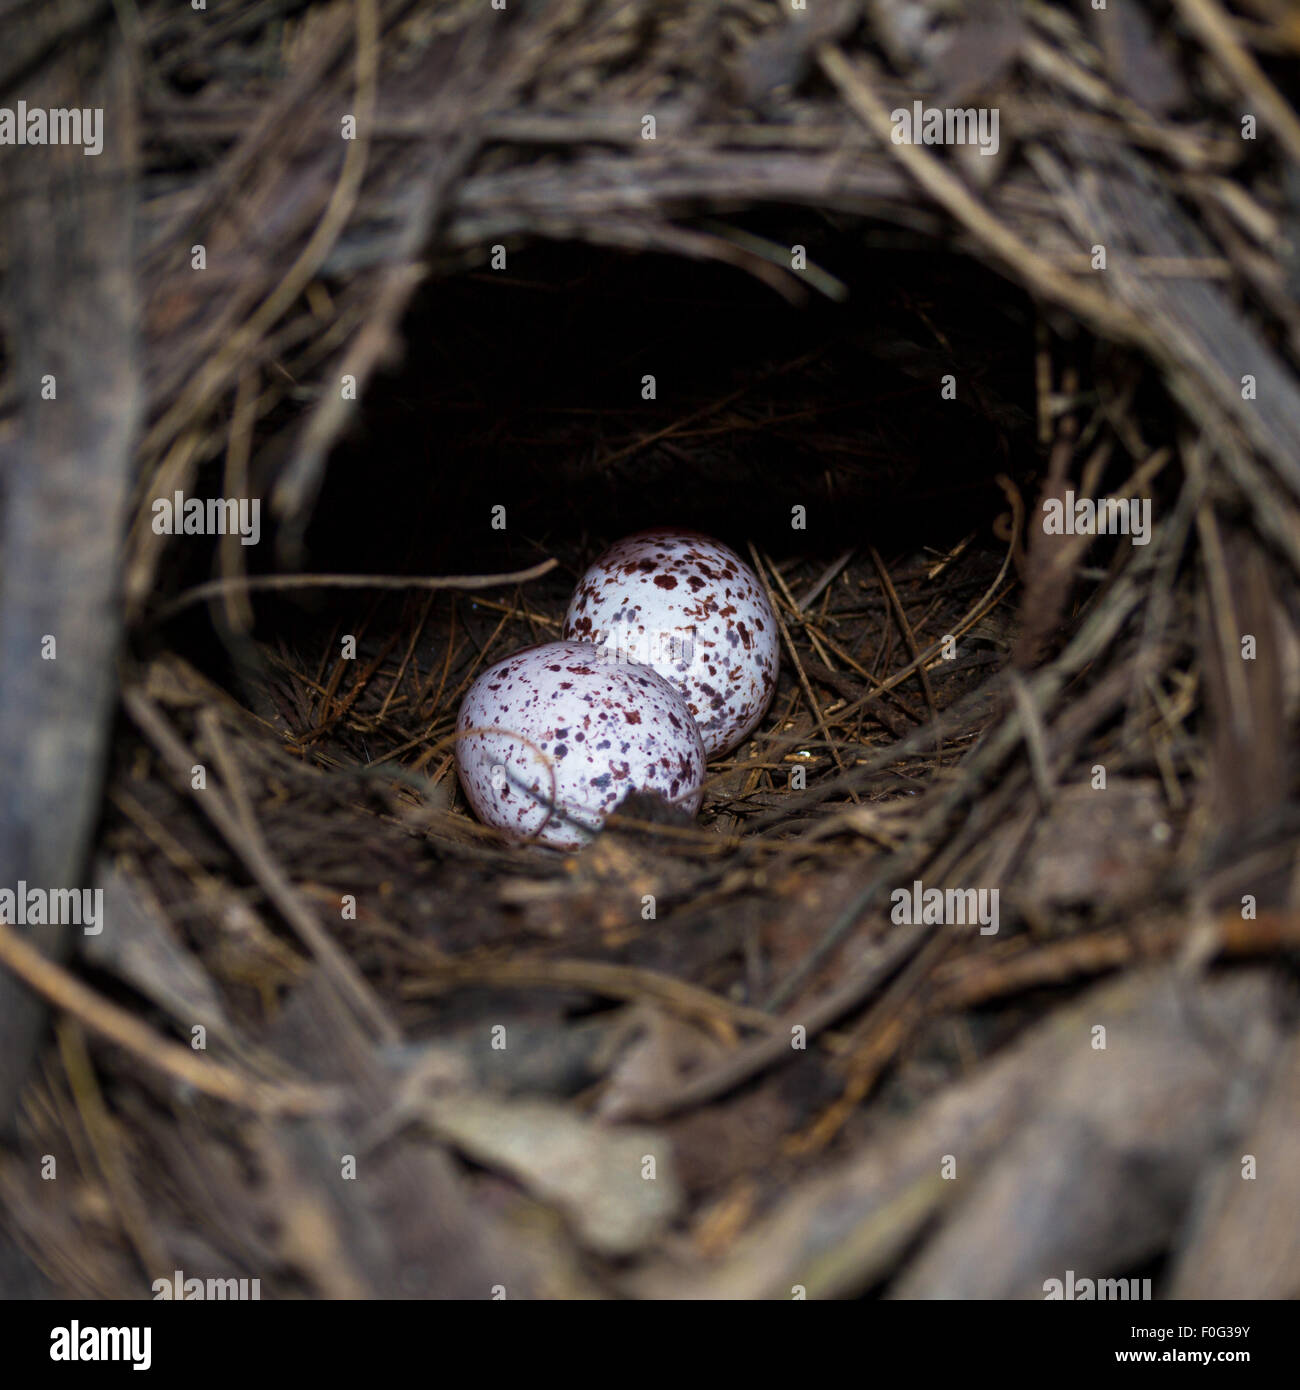 A nest filled with two Mangrove Pitta bird eggs. Stock Photo